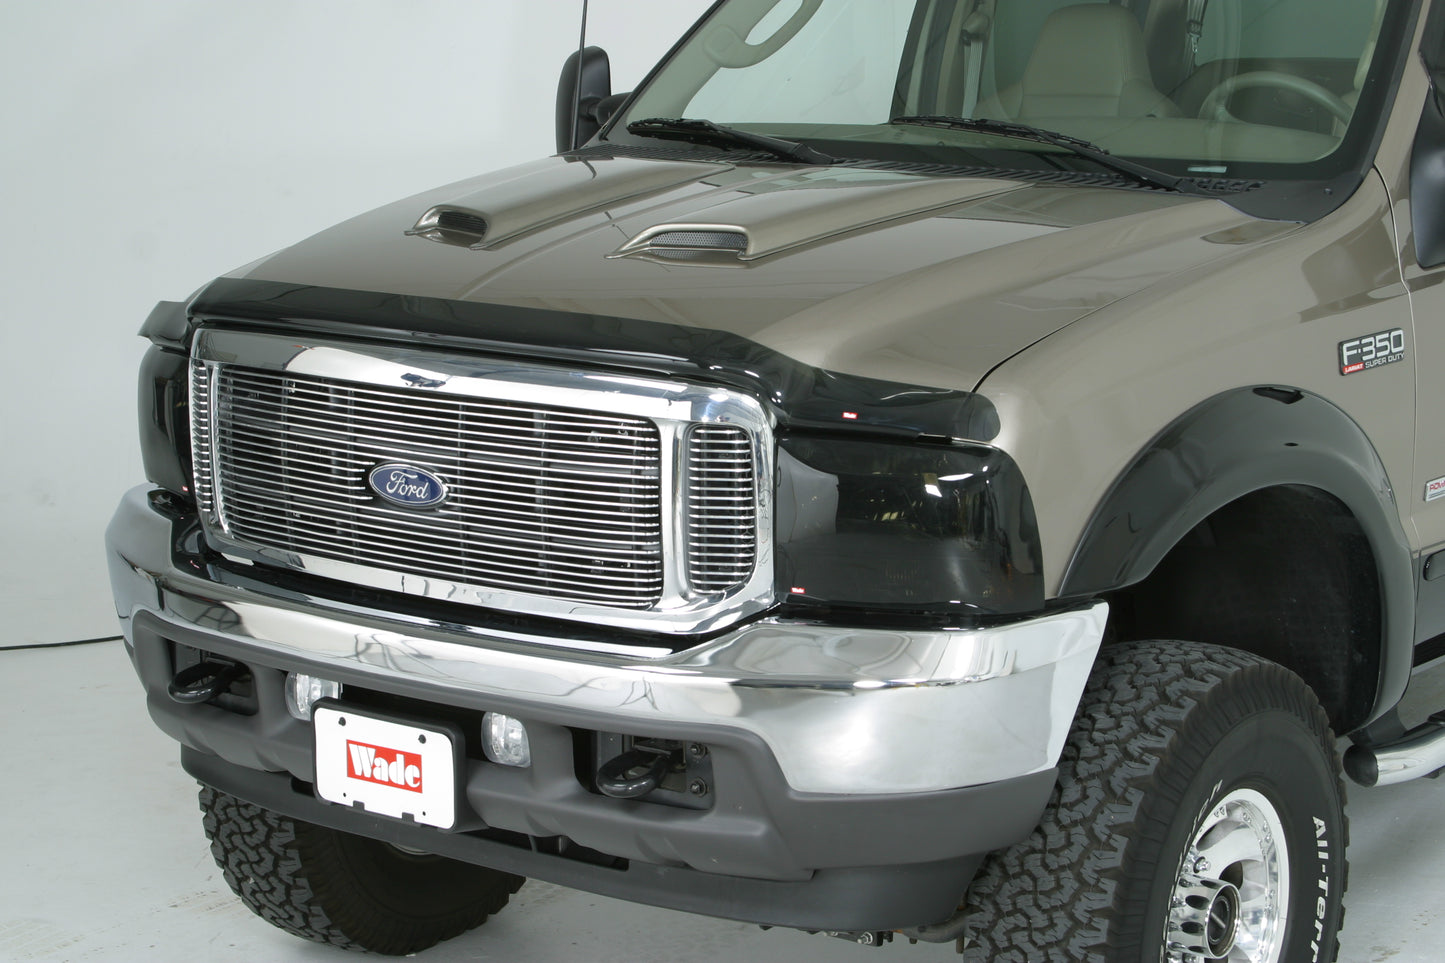 1982 Ford F-Series Head Light Covers